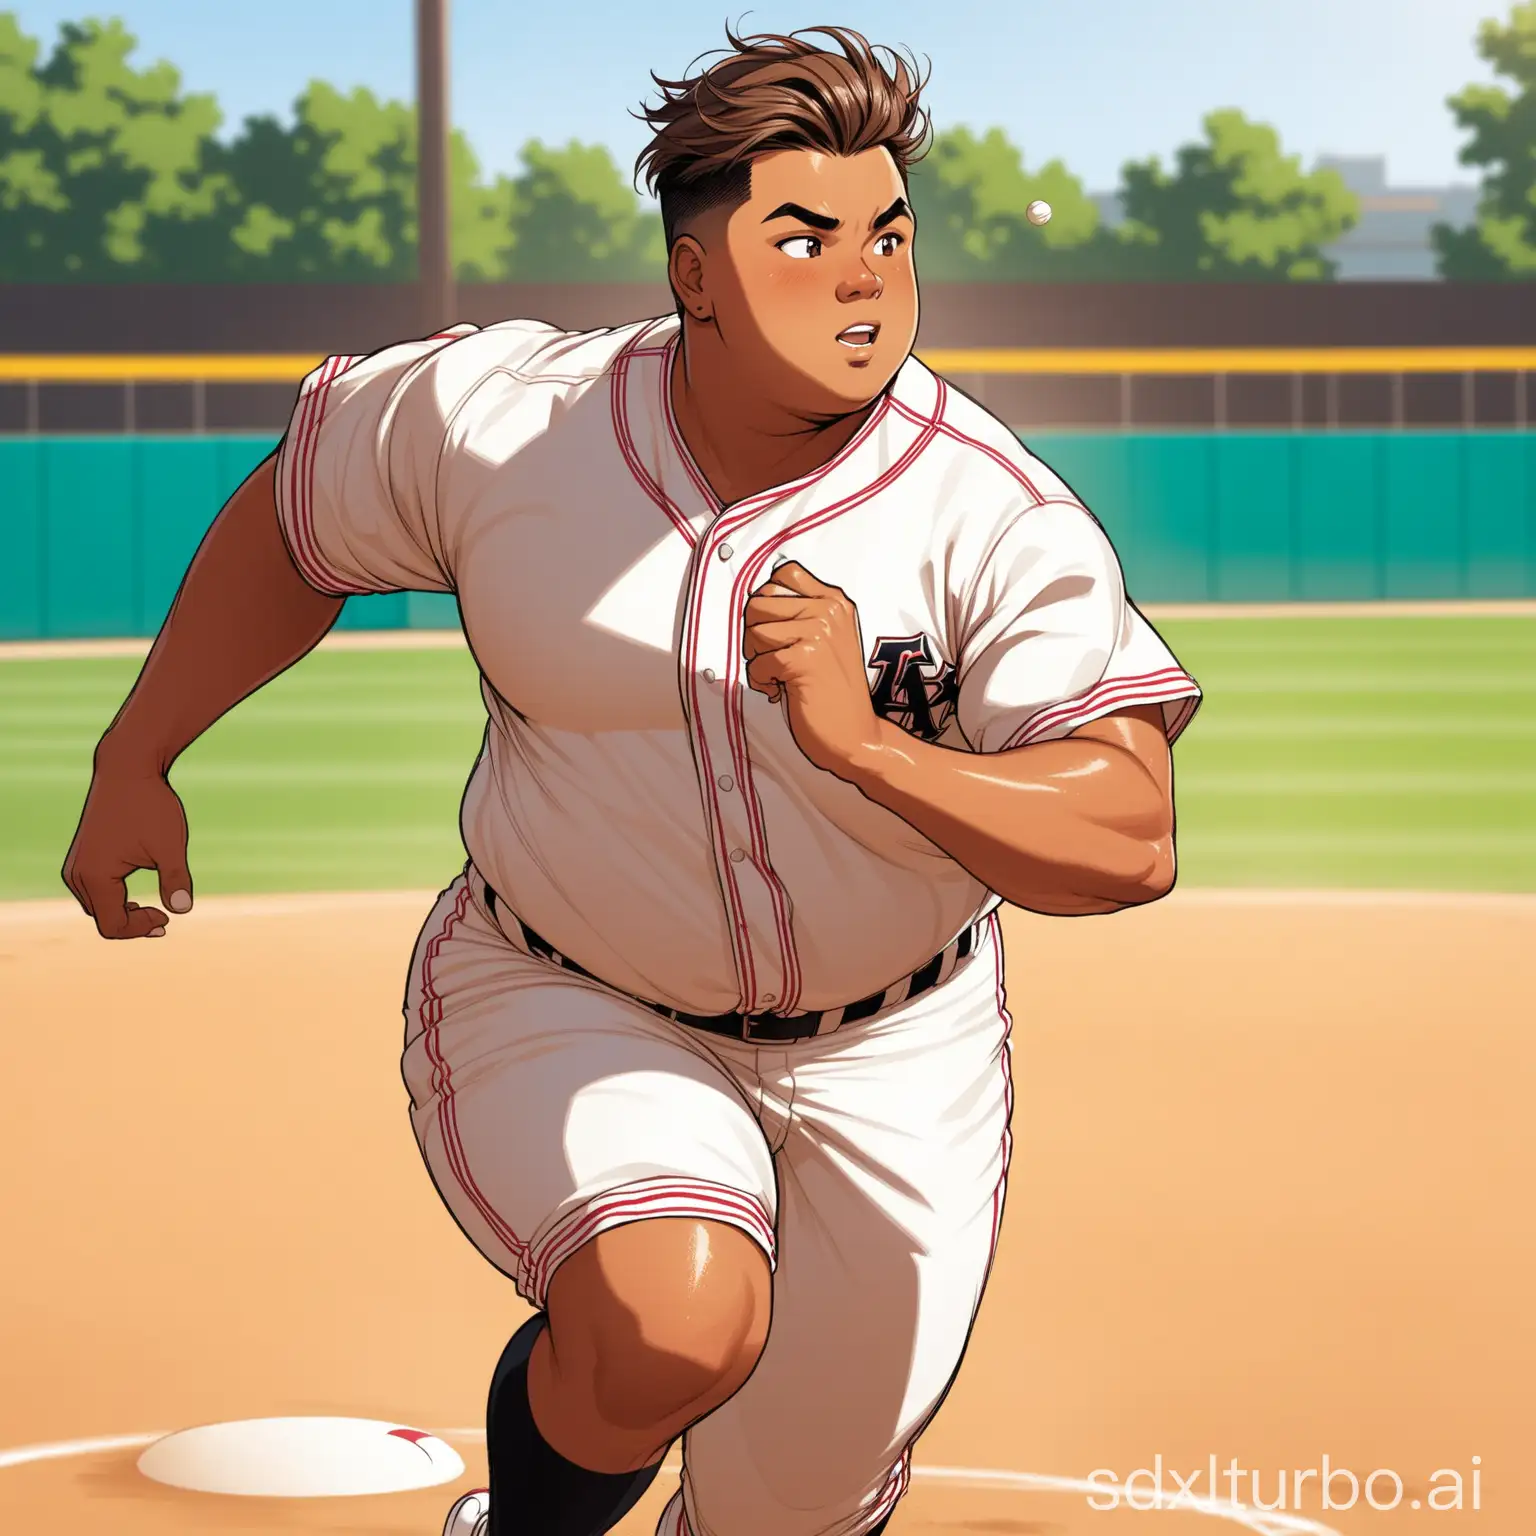 A handsome and chubby young man with tanned skin and aesthetic hairstyle, playing baseball, running